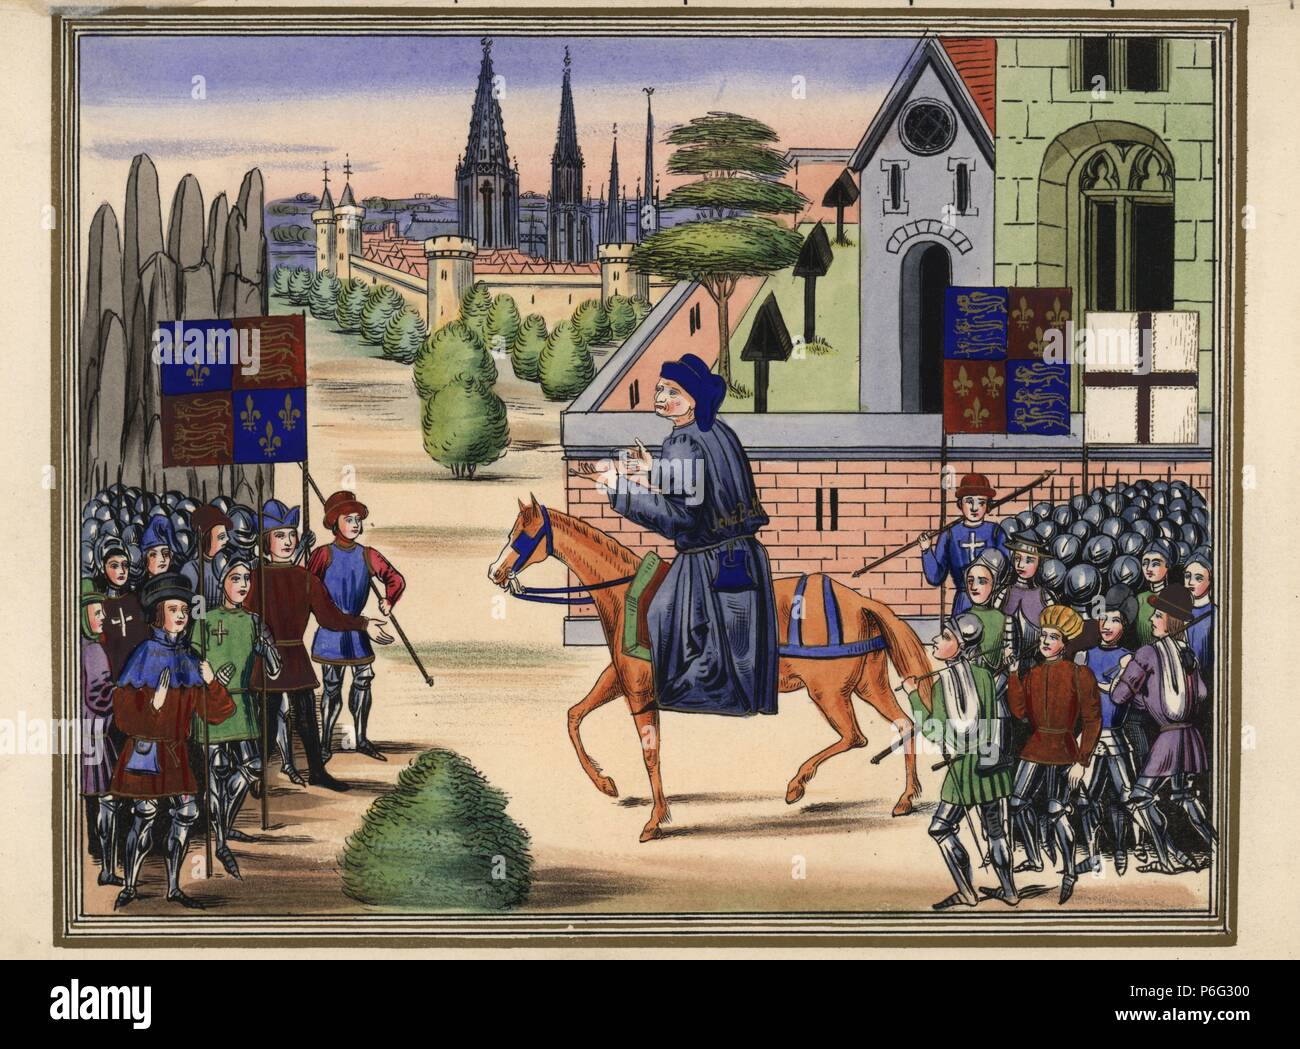 John Ball, Lollard priest, on horseback, encouraging Wat Tyler (far left) and his rebels during the Peasants' Revolt of 1381. Banners of England and St. George. Handcoloured lithograph after an illuminated manuscript from Sir John Froissart's 'Chronicles of England, France, Spain and the Adjoining Countries, from the Latter Part of the Reign of Edward II to the Coronation of Henry IV,' George Routledge, London, 1868. Stock Photo